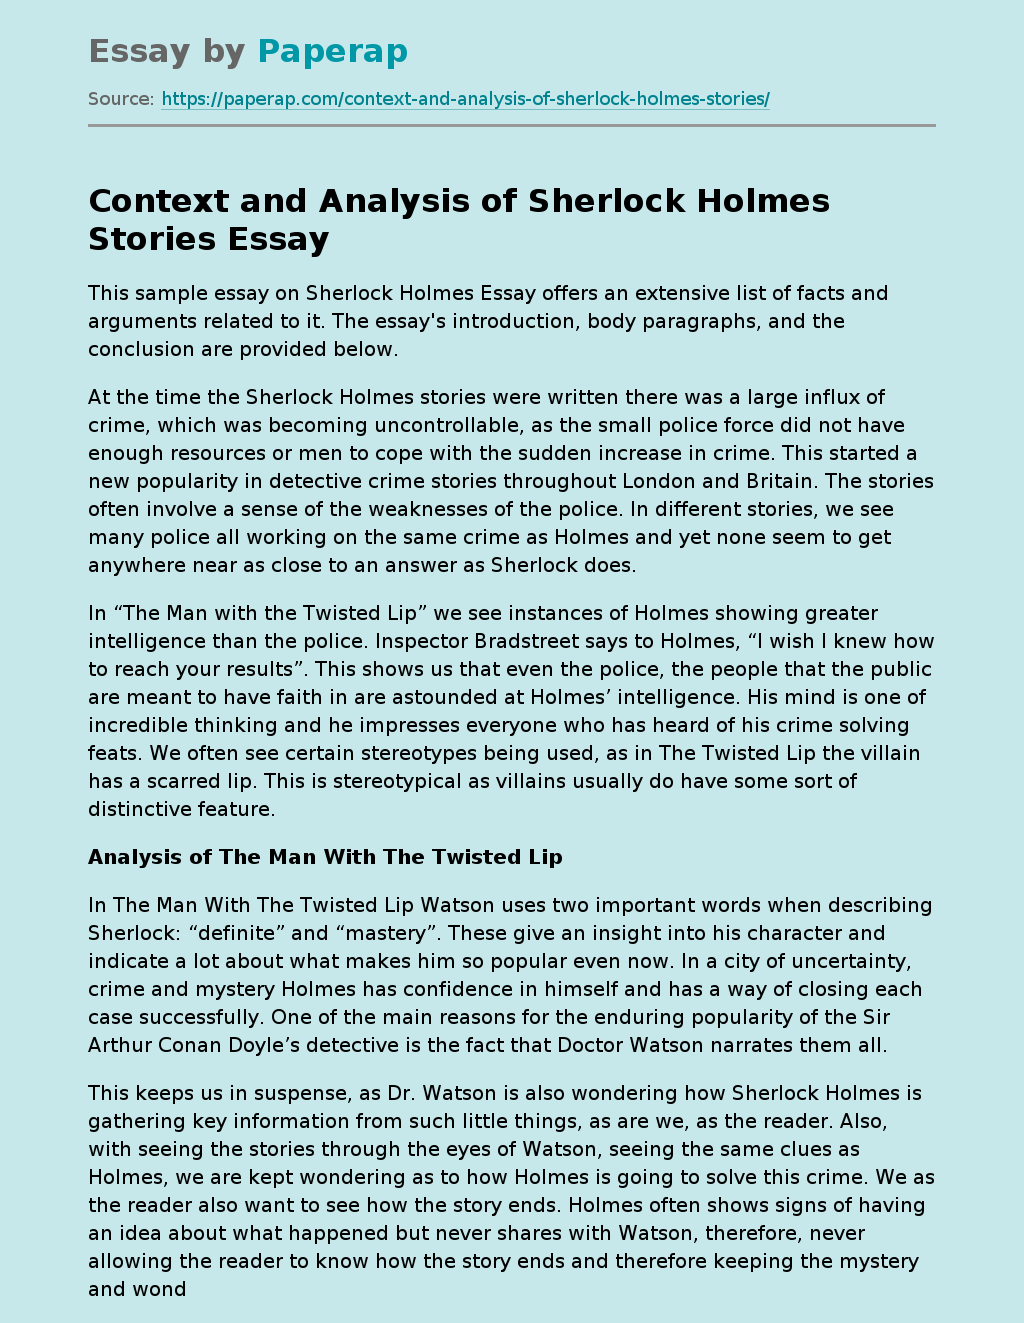 Context and Analysis of Sherlock Holmes Stories